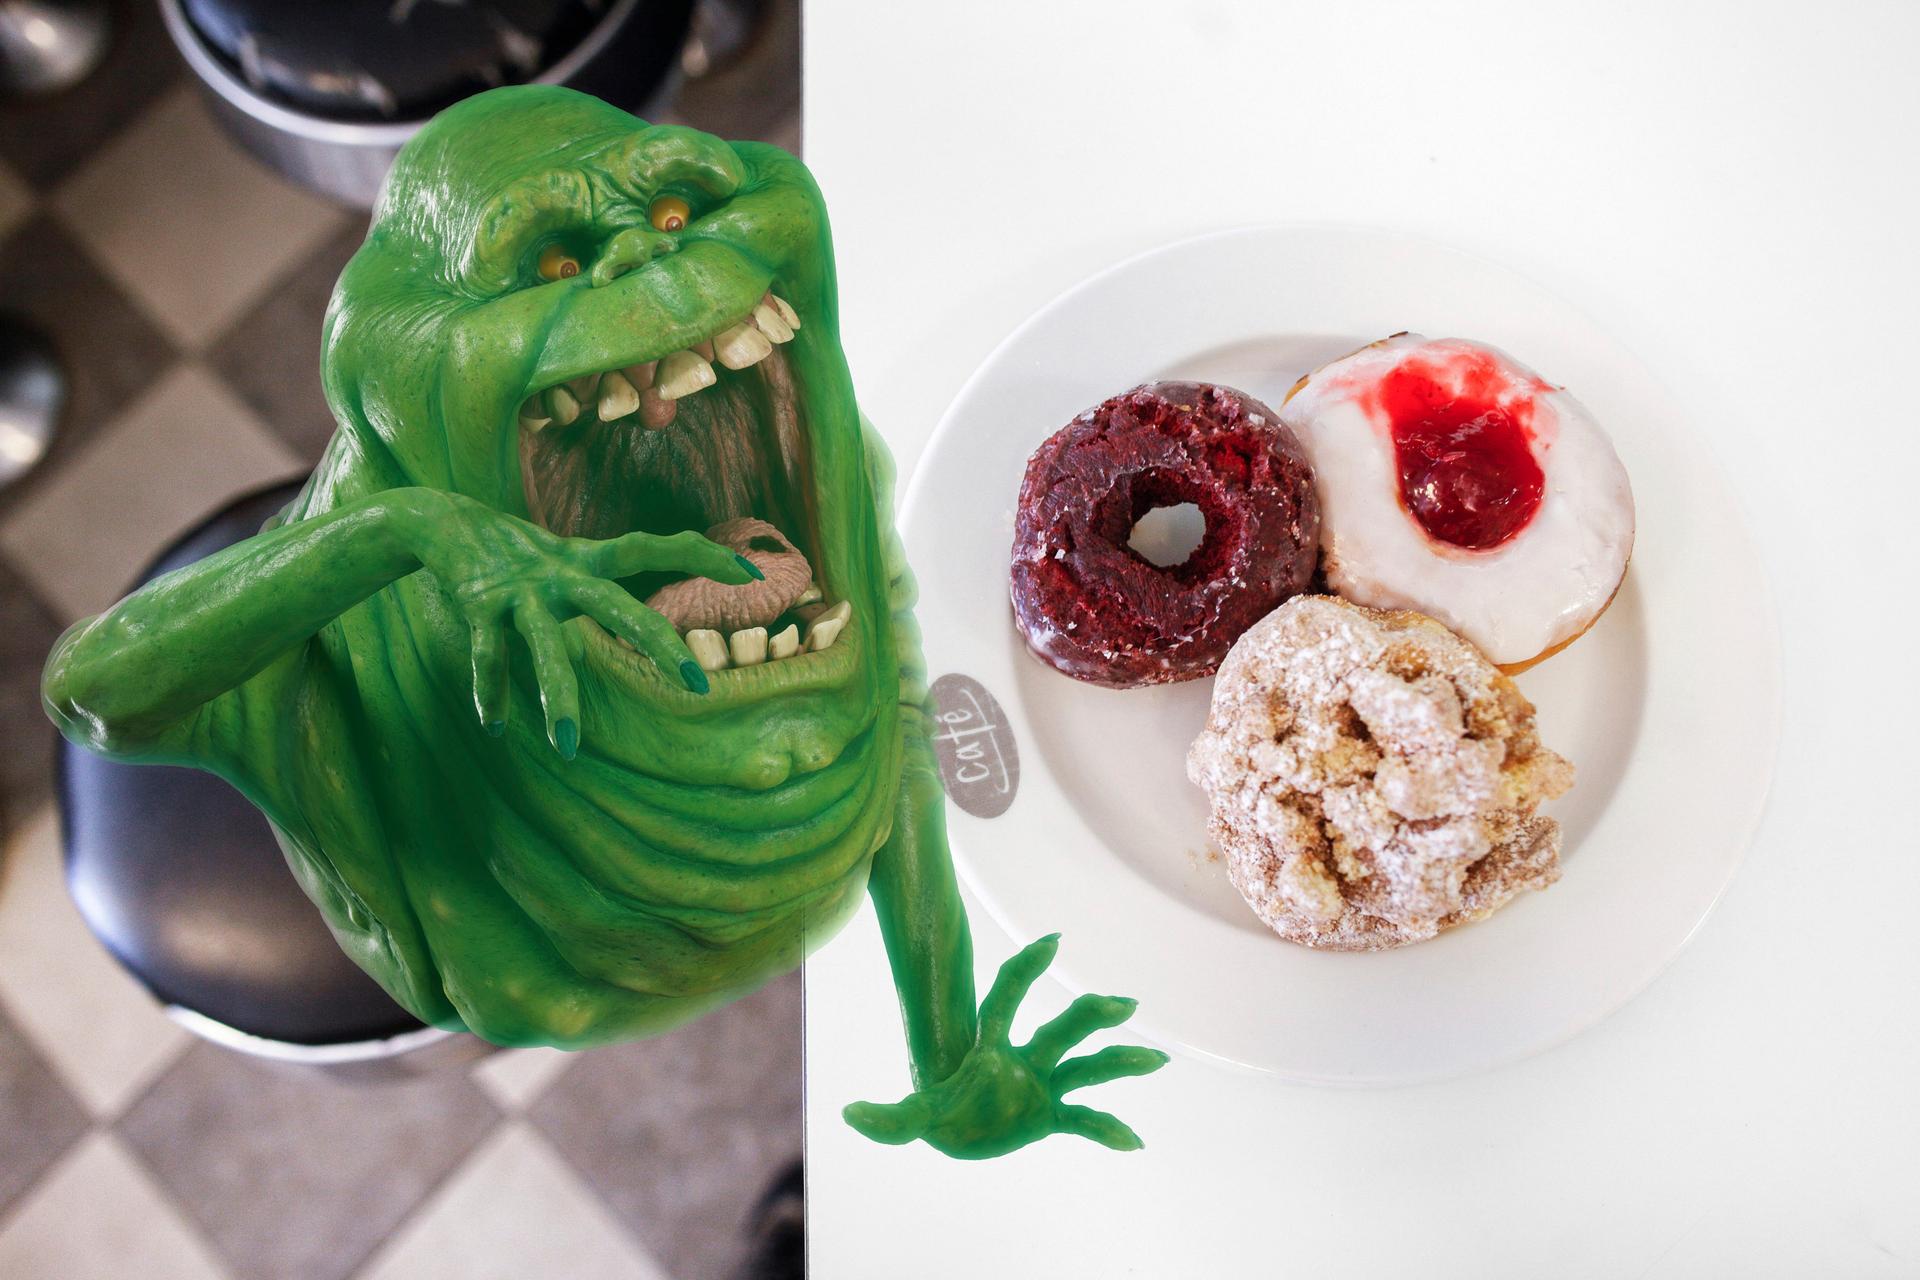 Slimer from Ghostbusters eating donuts at Peter Pan Donut & Pastry Shop.